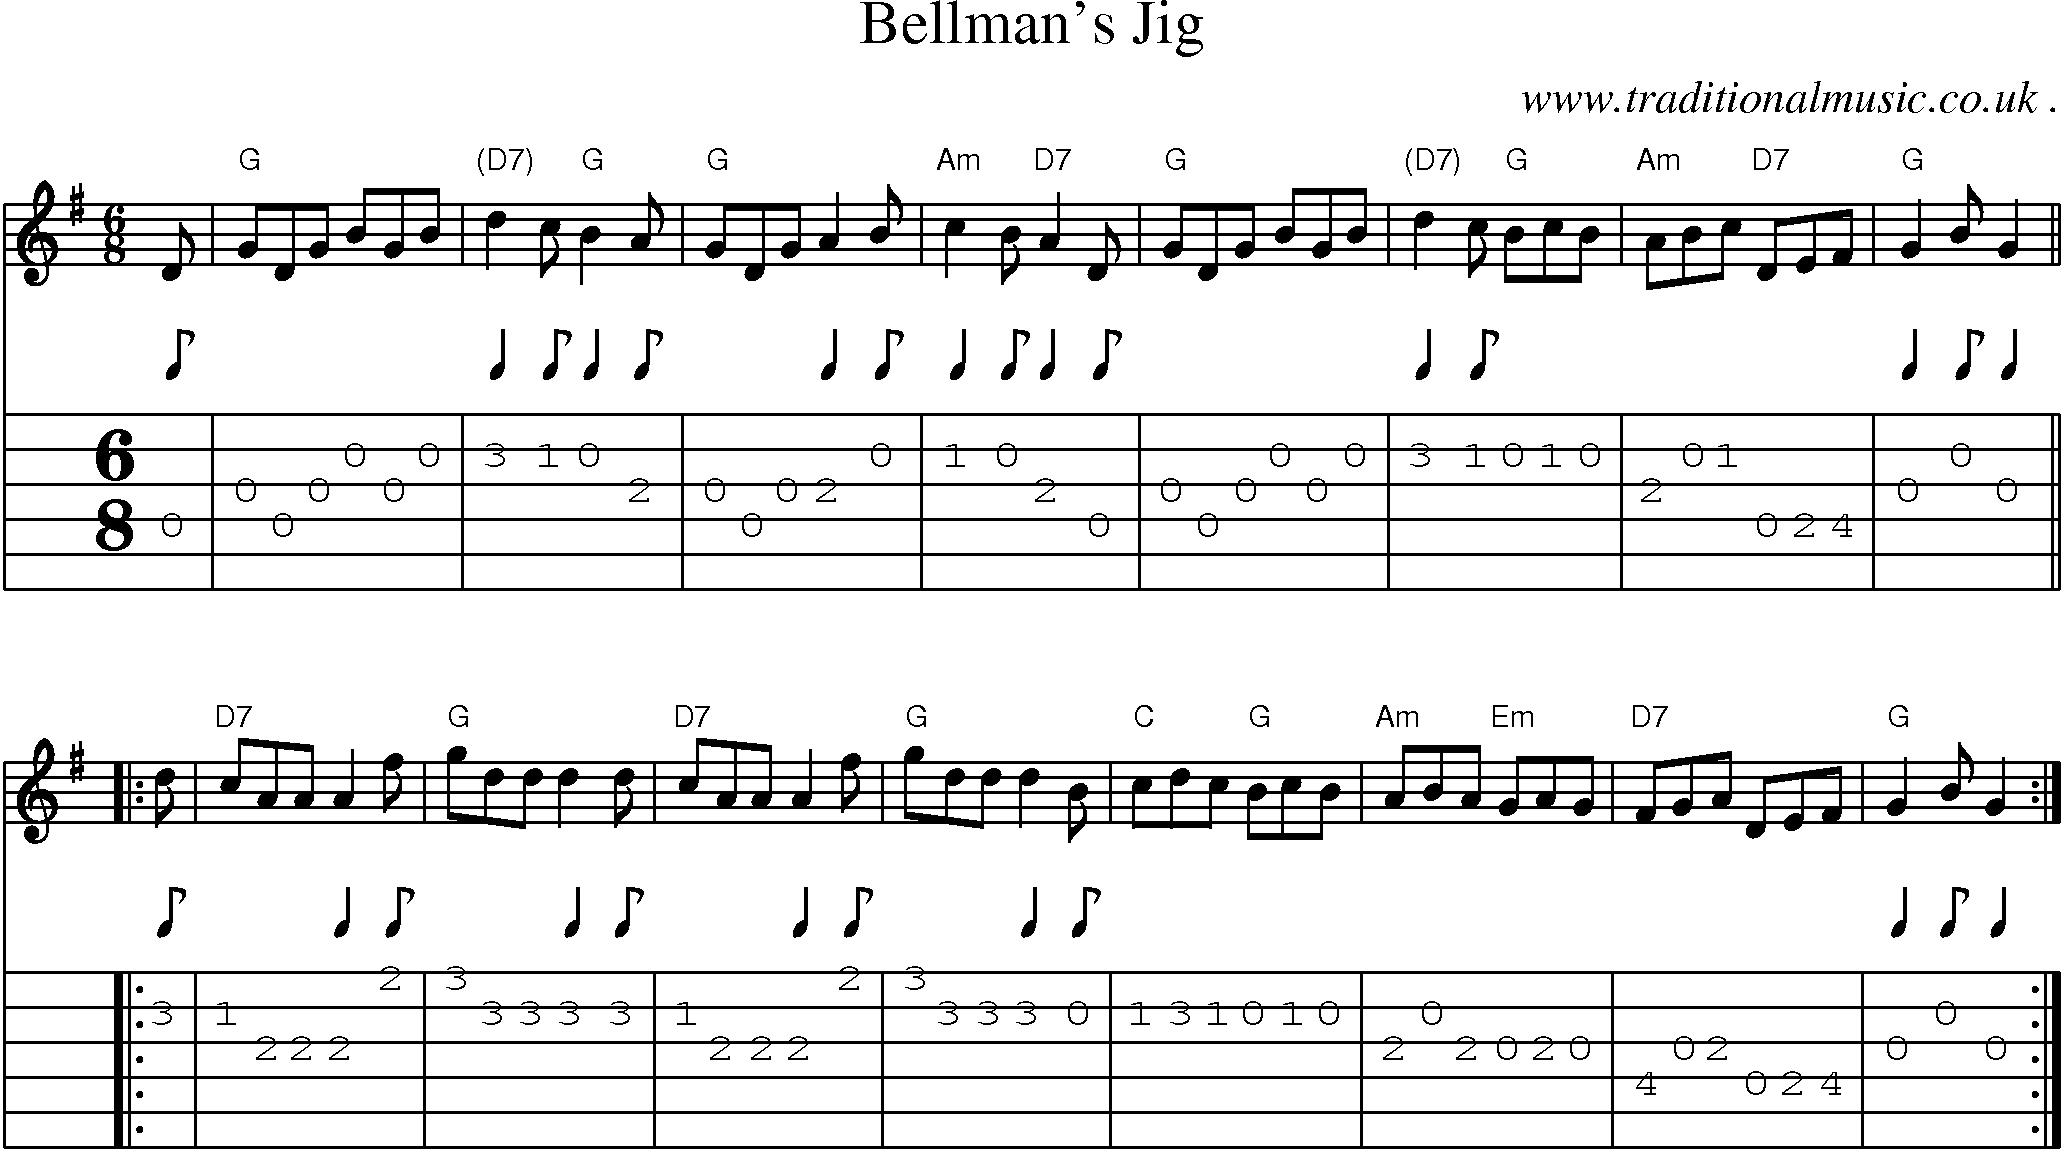 Sheet-music  score, Chords and Guitar Tabs for Bellmans Jig